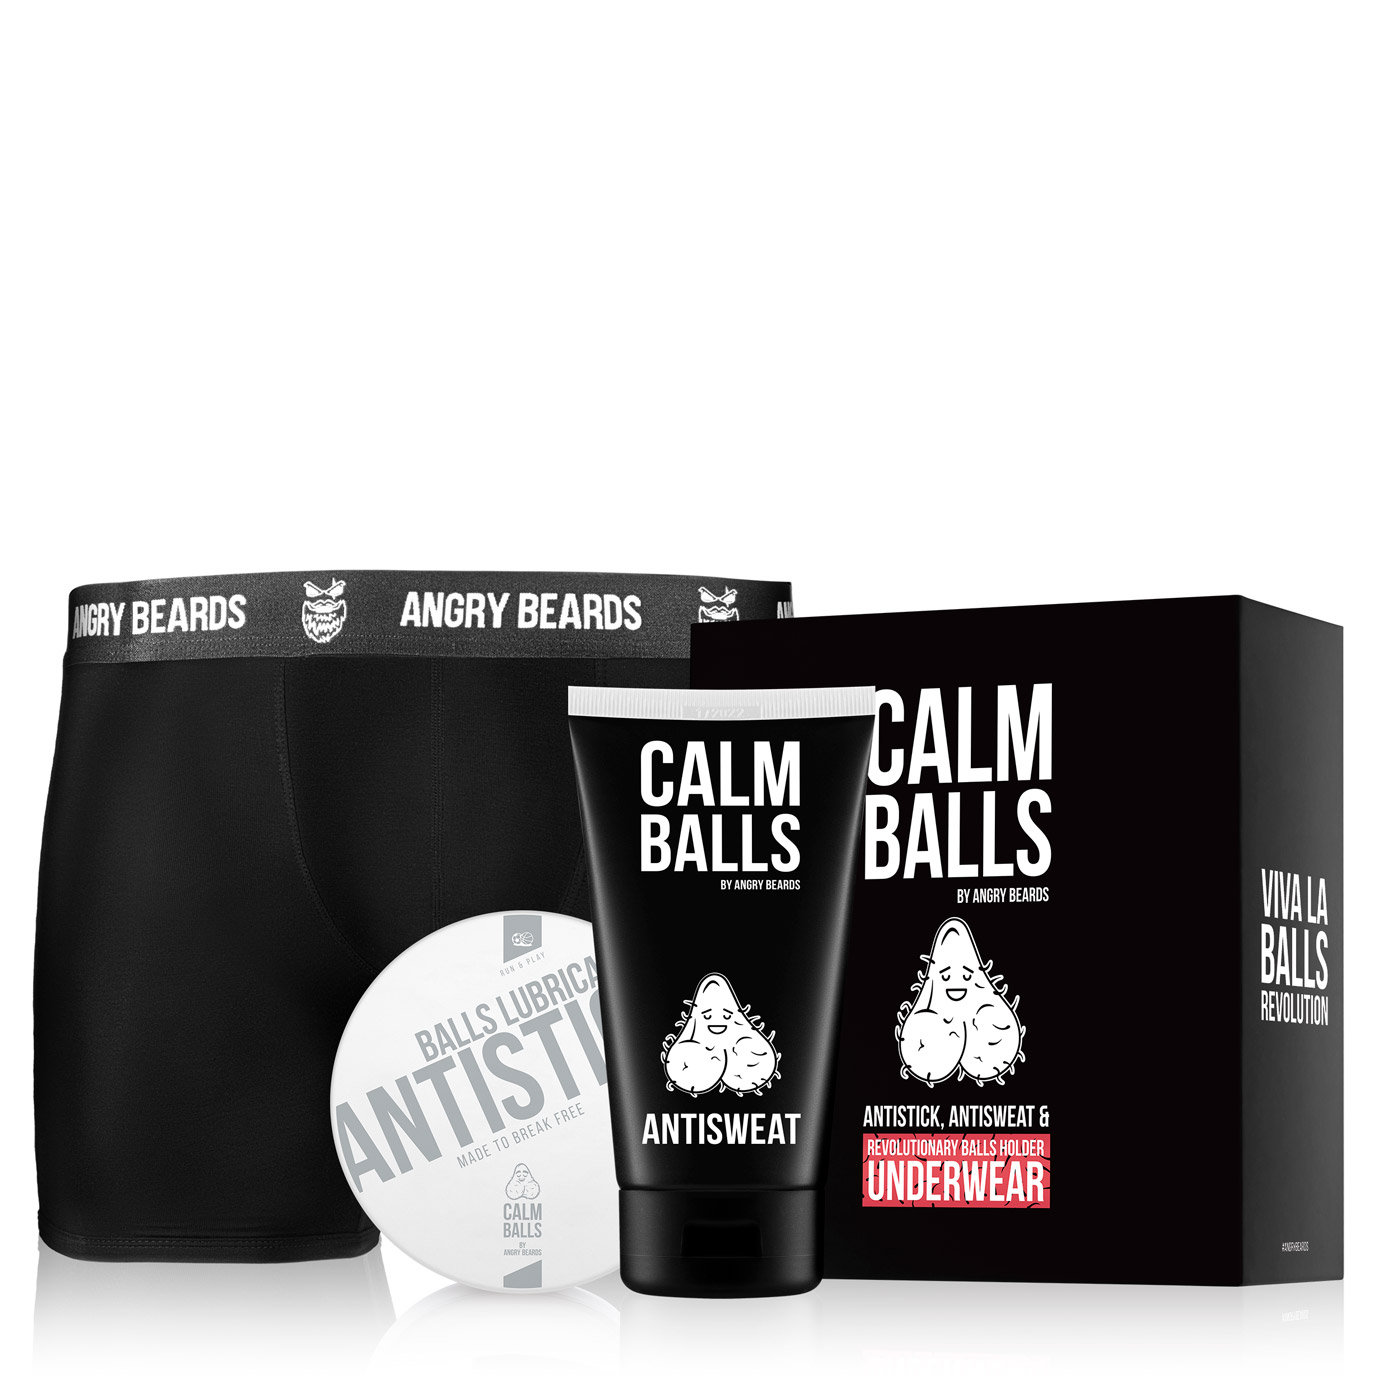 Complete care for your balls + boxers - angrybeards.eu